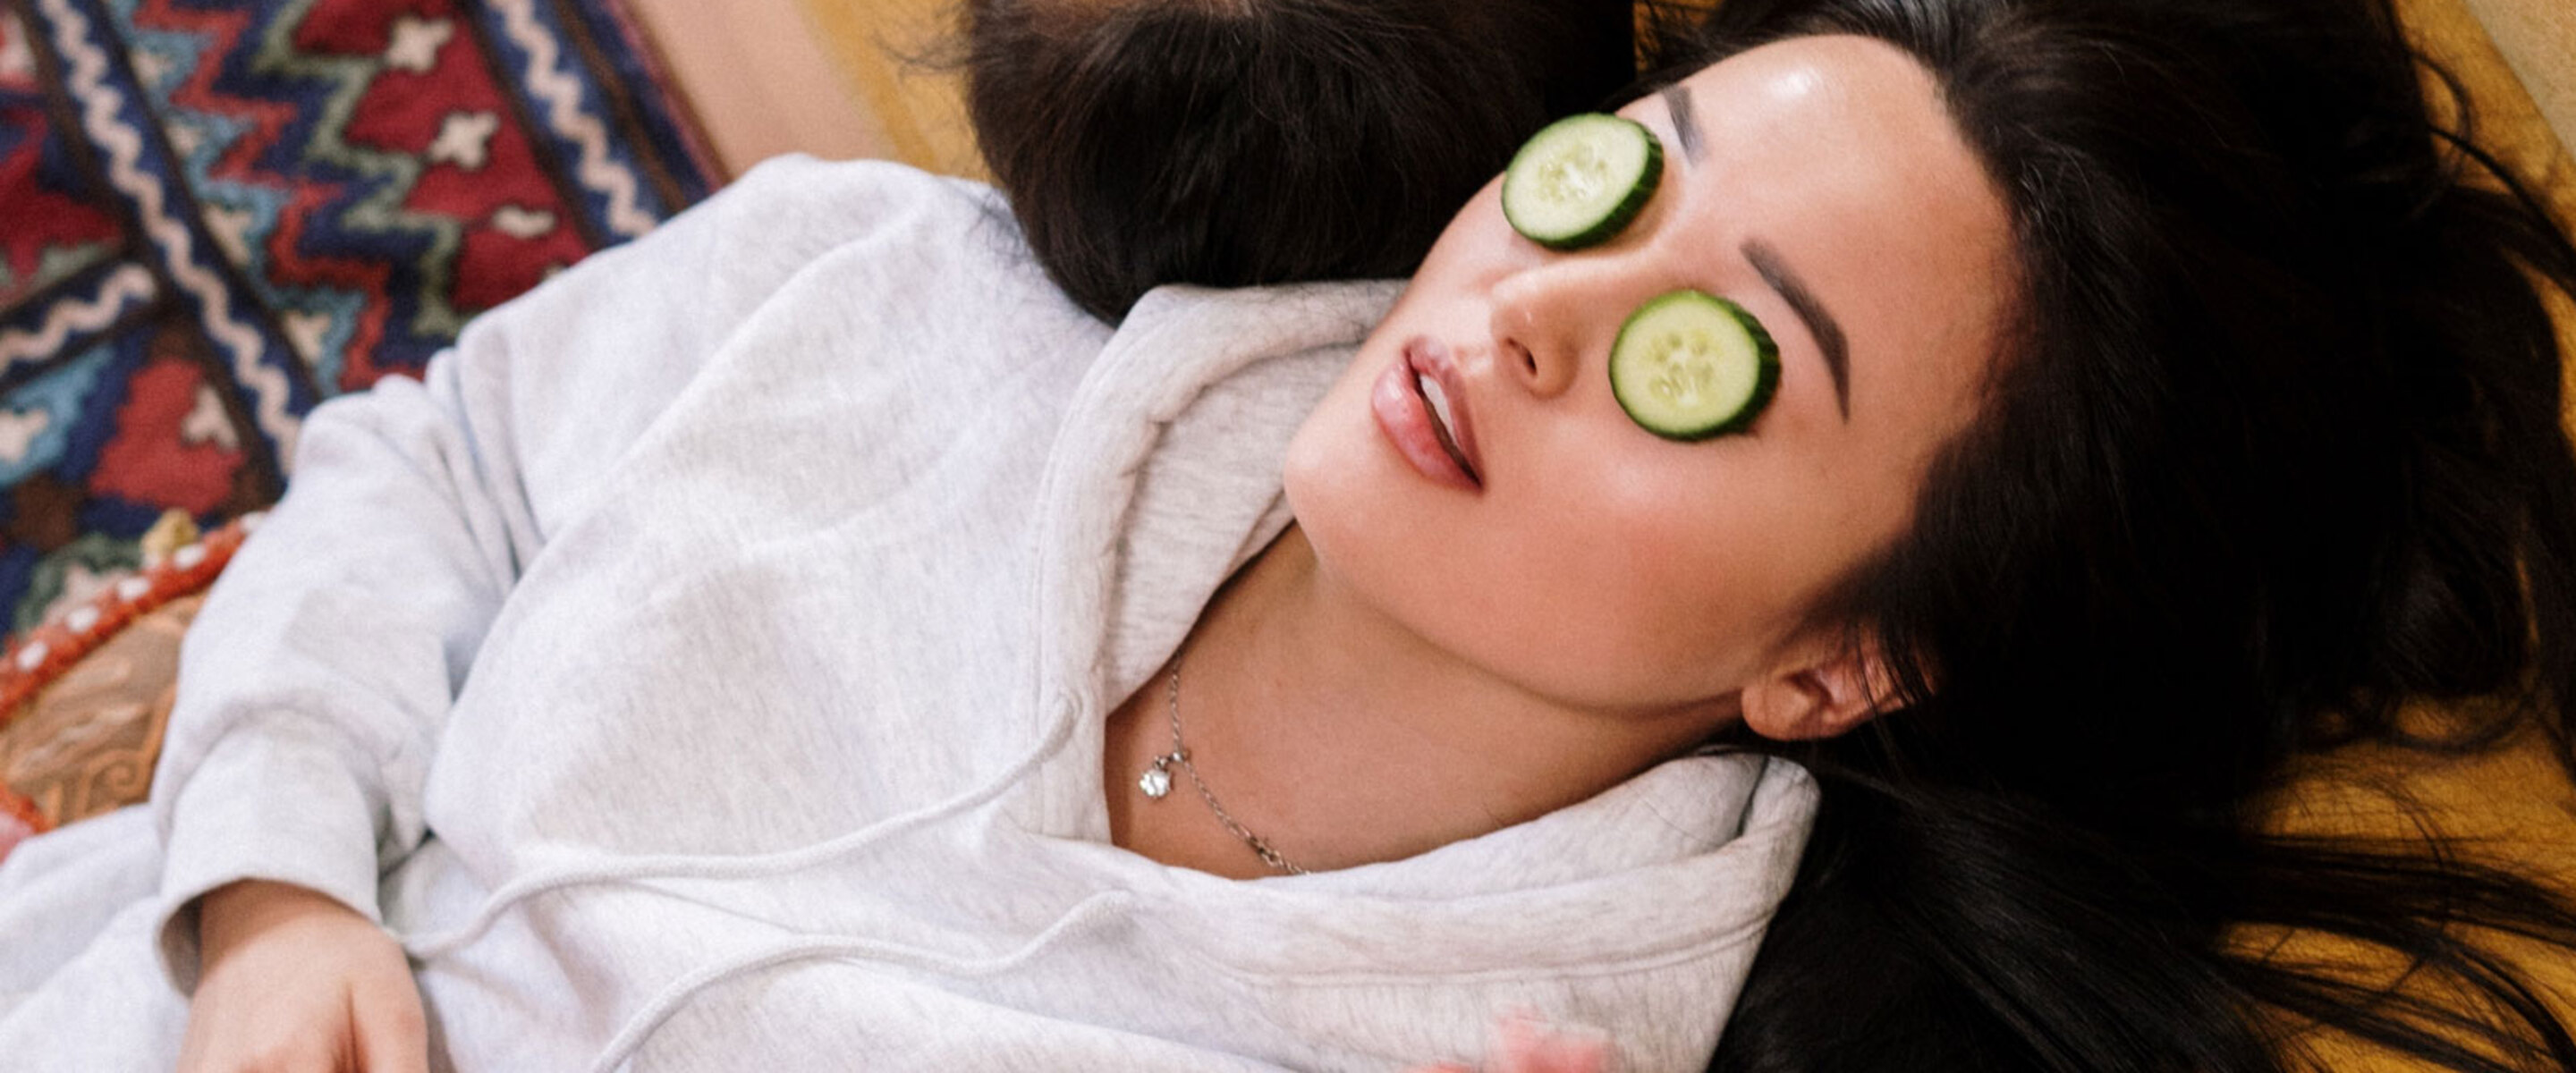 From Cruelty-Free Skincare to Infrared Saunas: How to Create a Vegan Home Spa Oasis&nbsp;